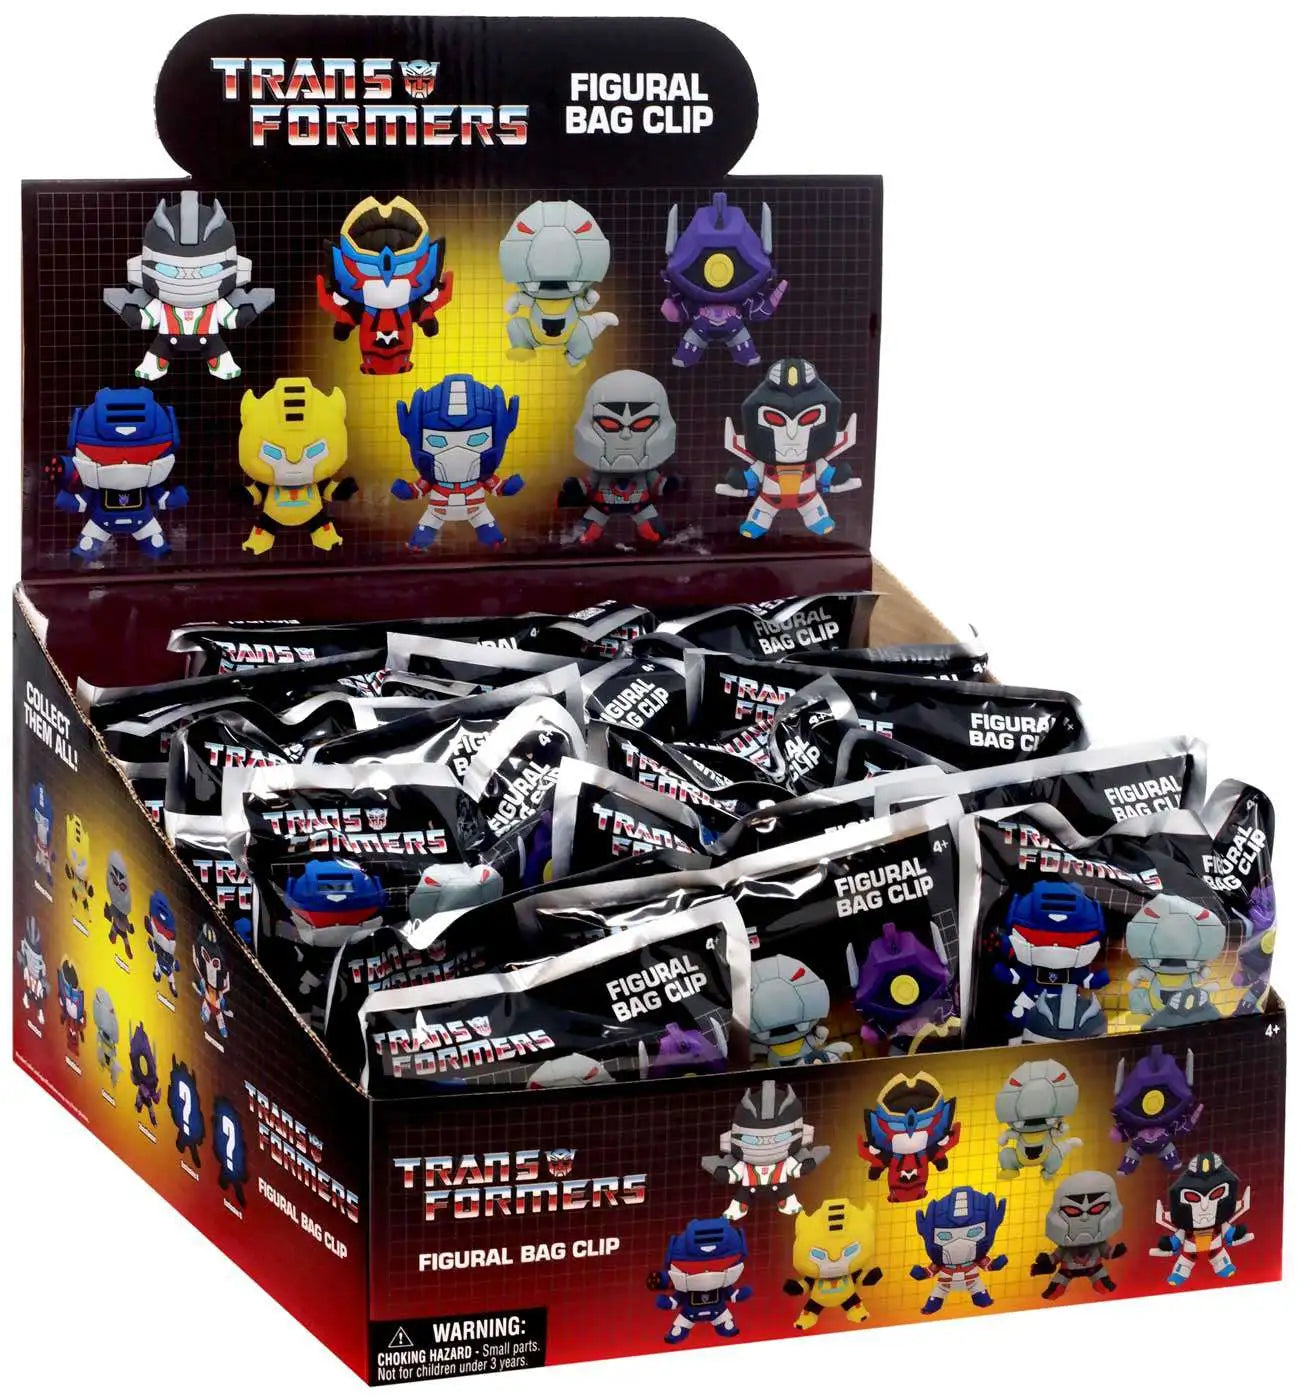 Transformers mystery bag clip